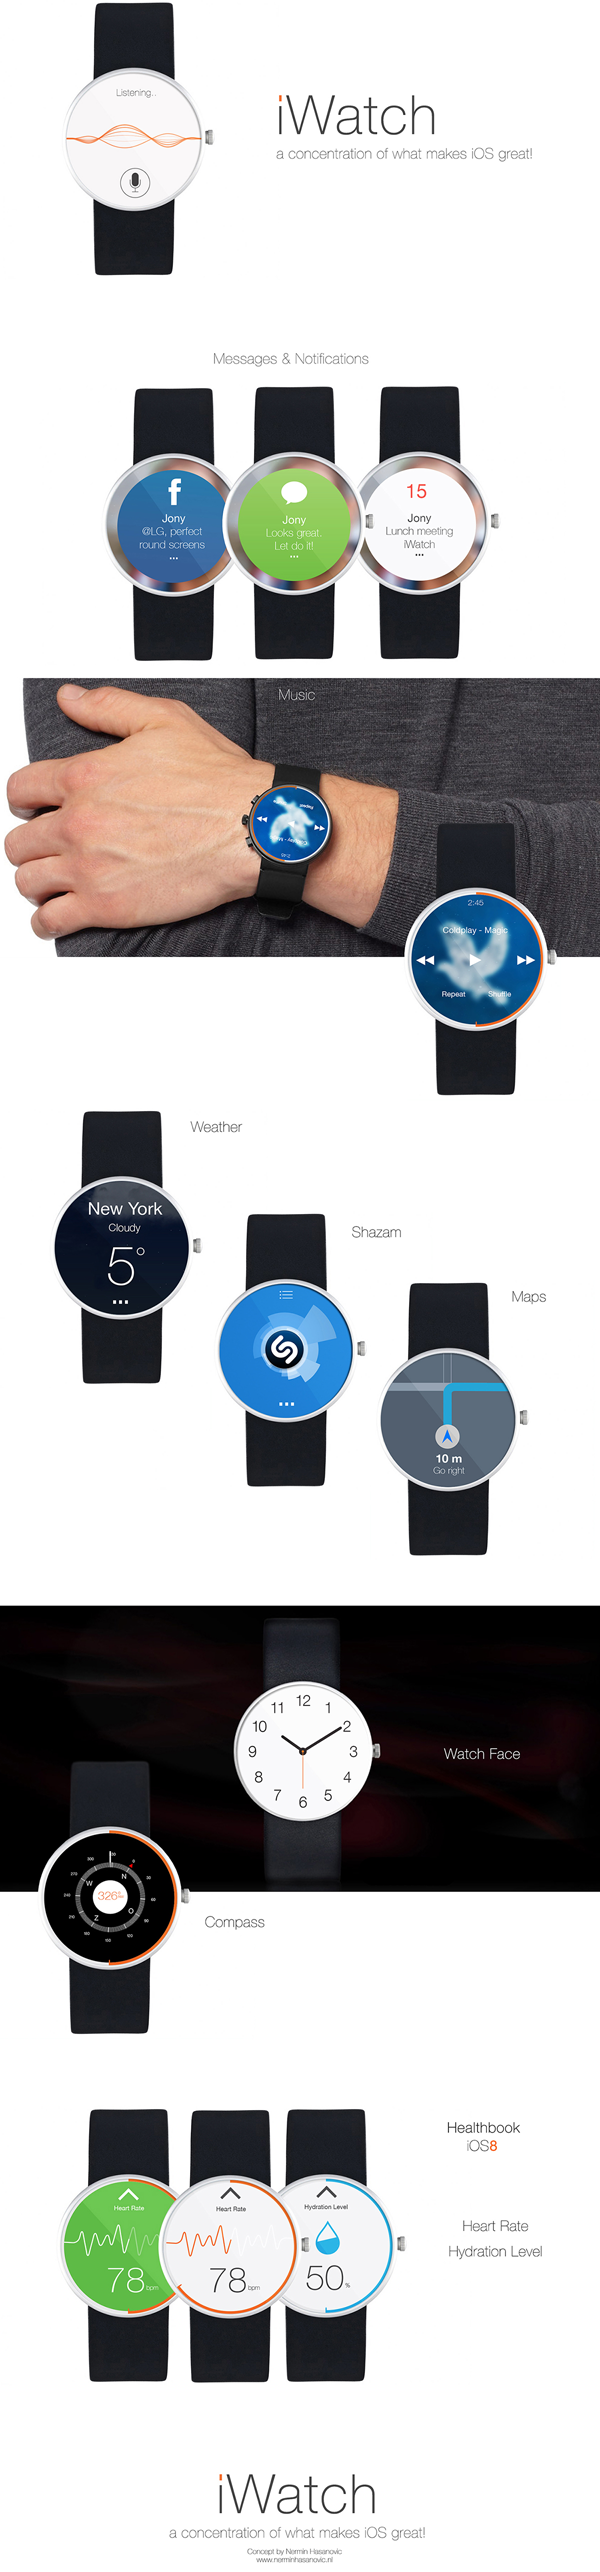 iWatch-concept1.png